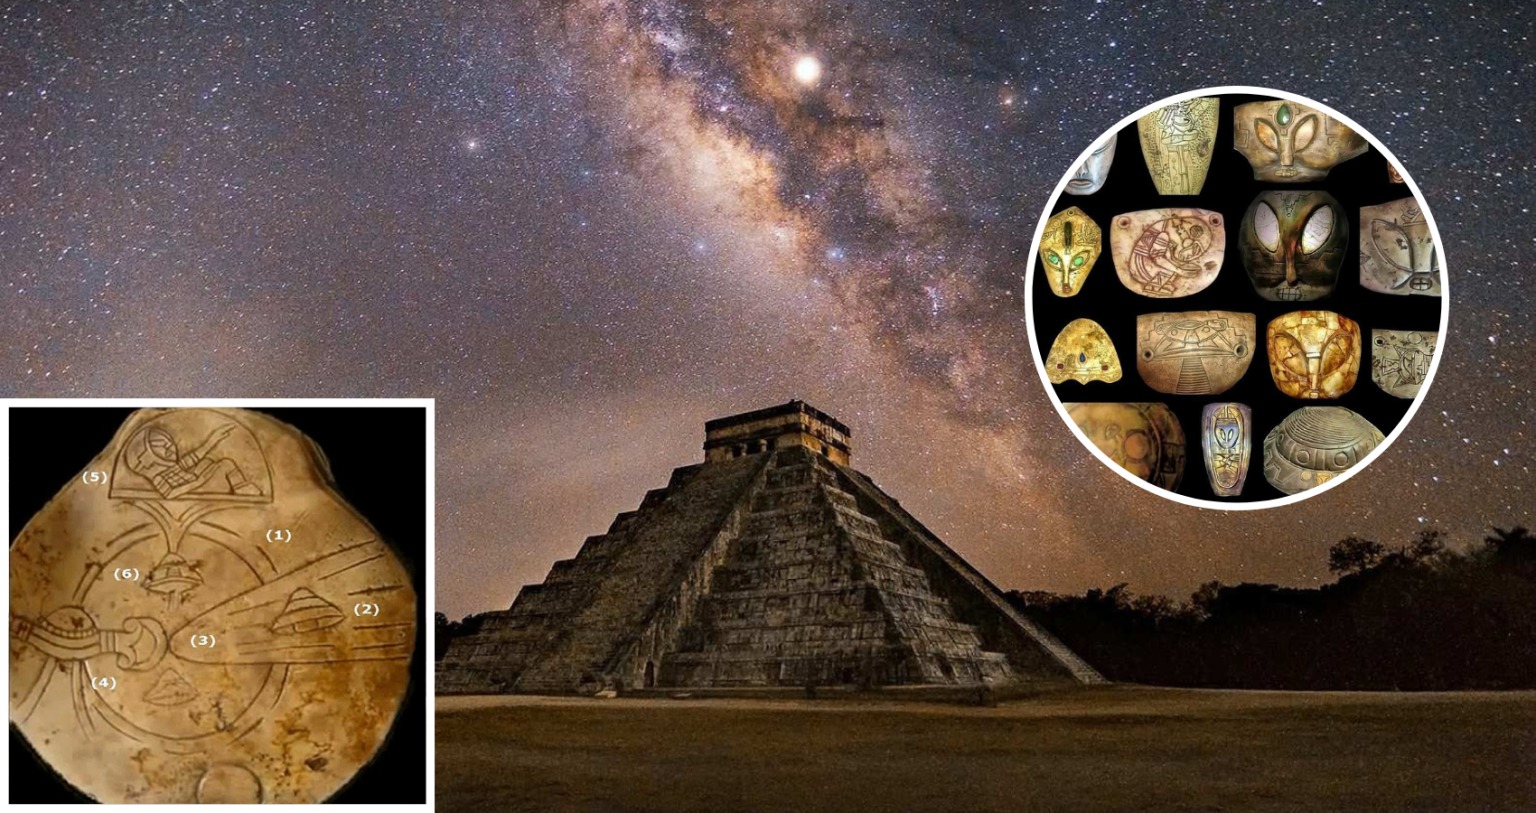 Ancient artifacts found in Mexico would prove Mayan contact with aliens